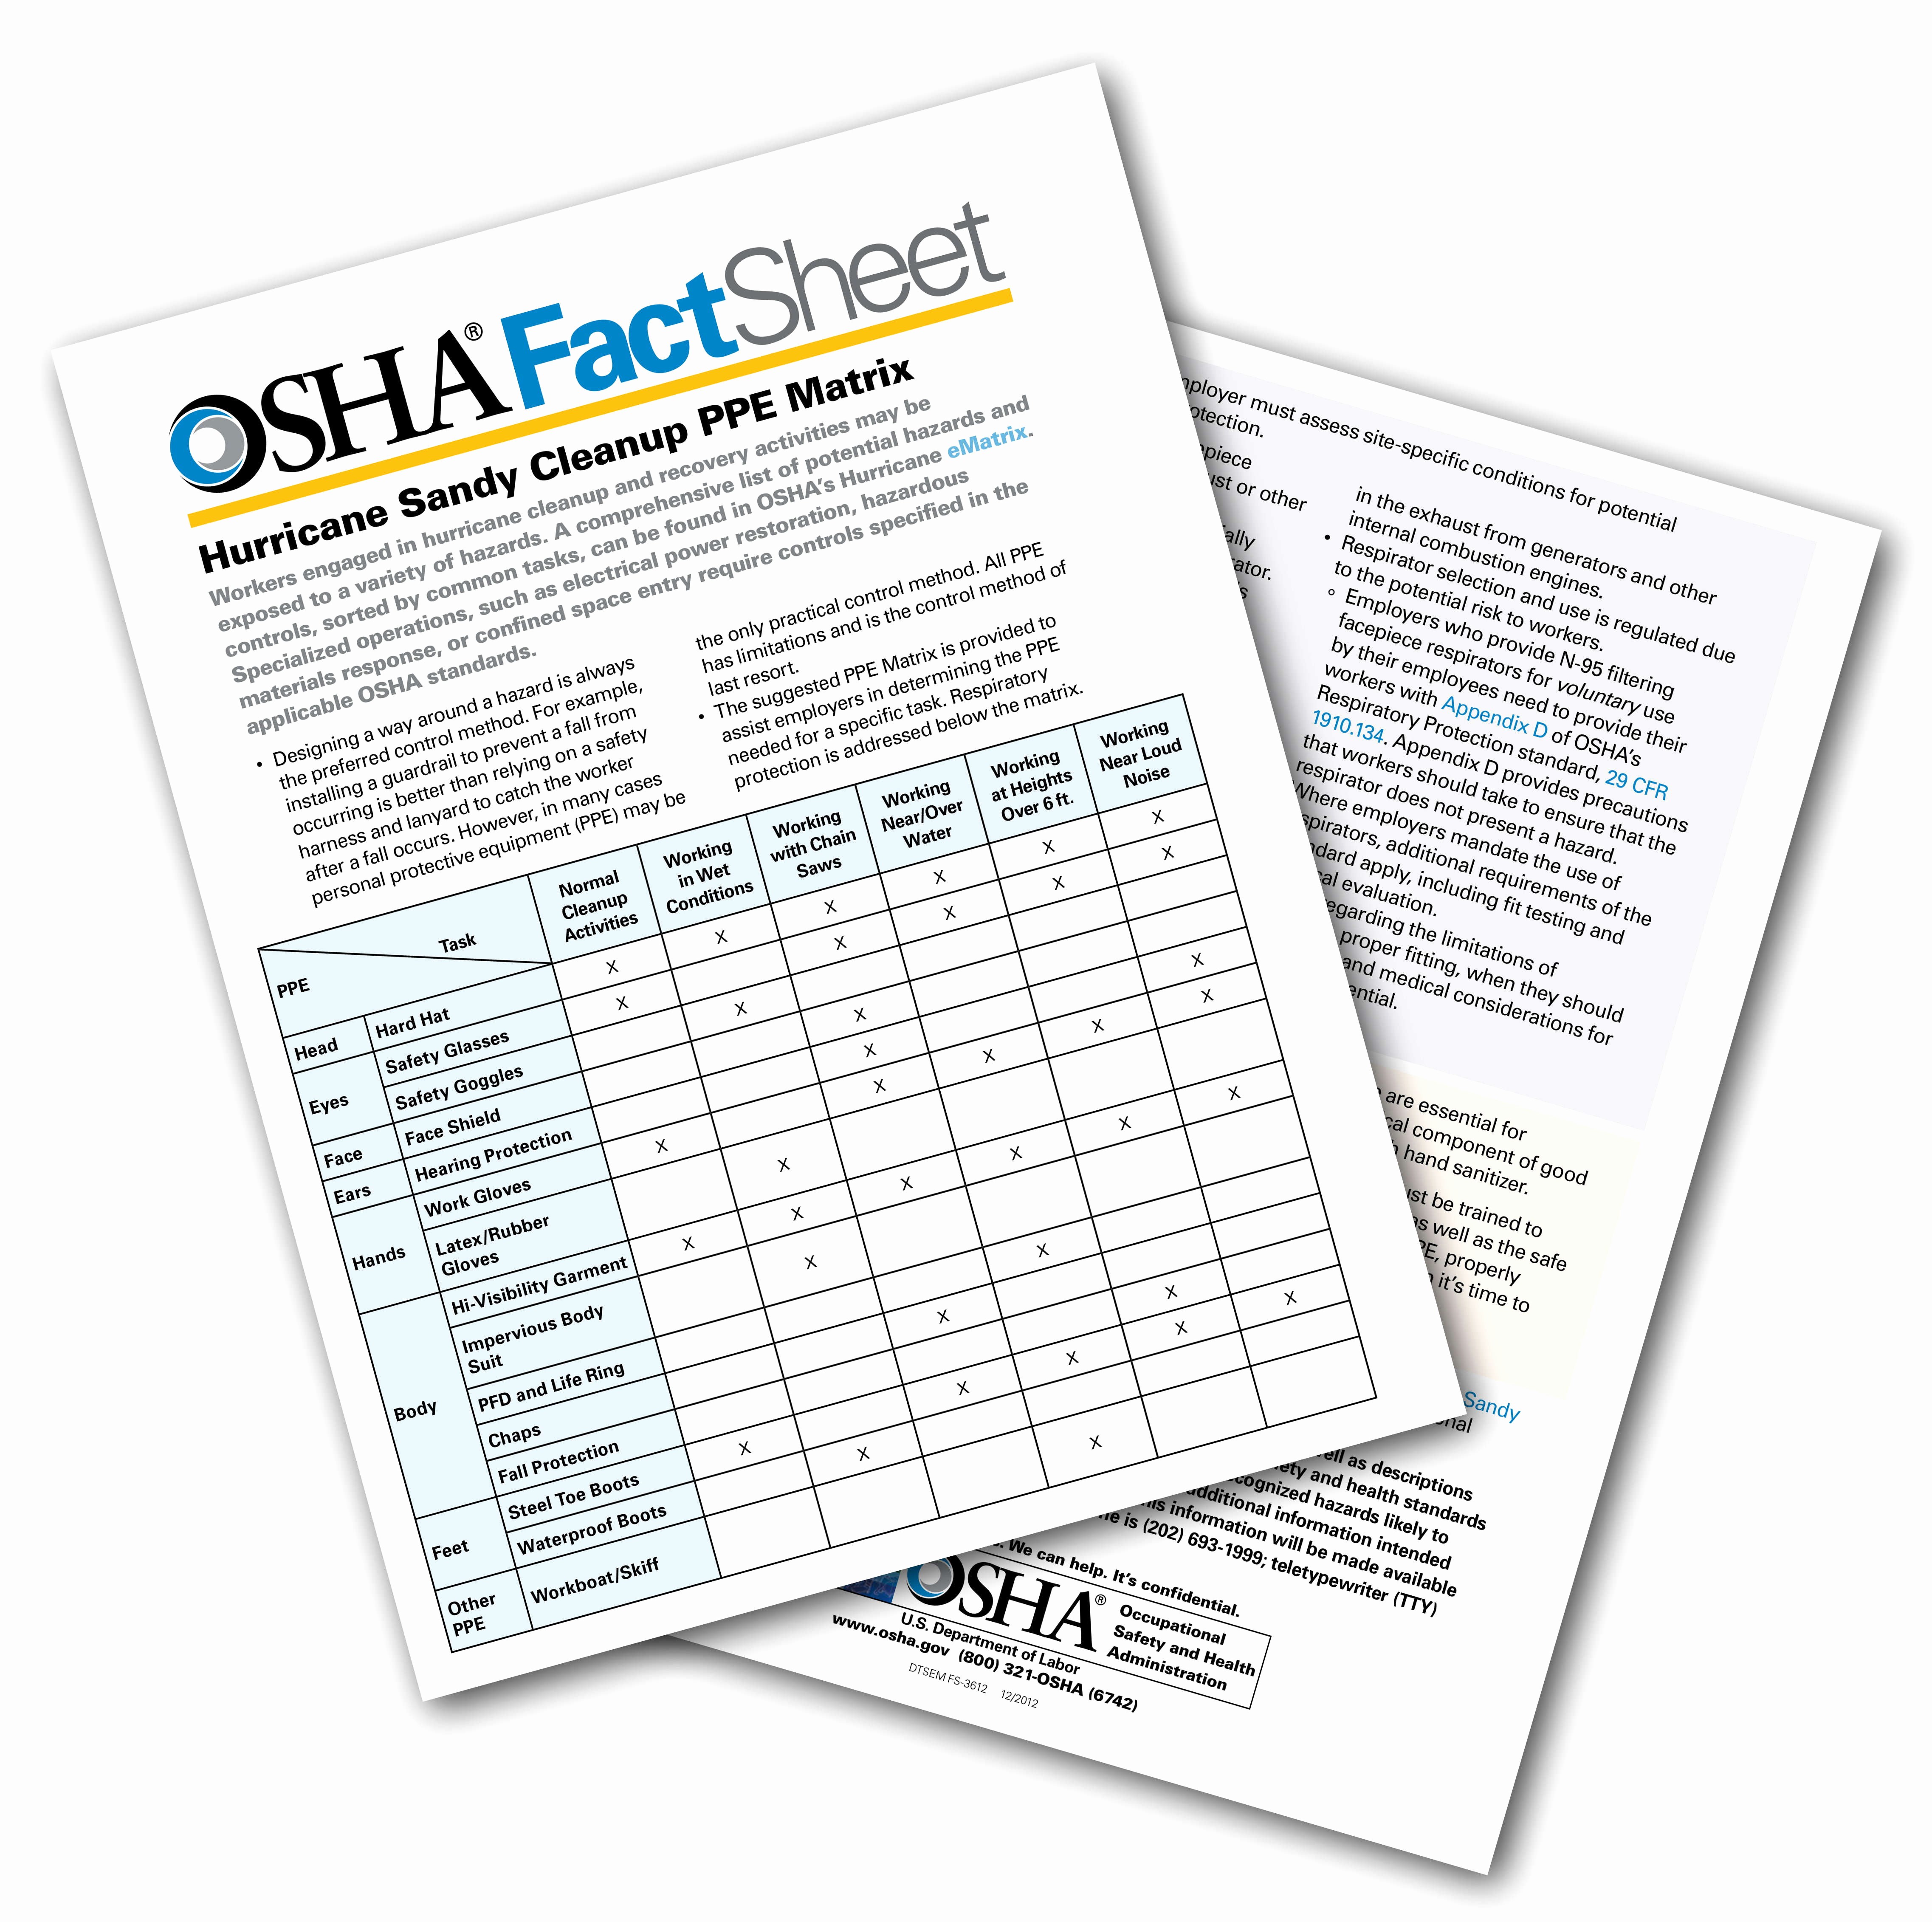 Osha Training Sign In Sheet Luxury A Few Things to Note About the Ghs Haz Update